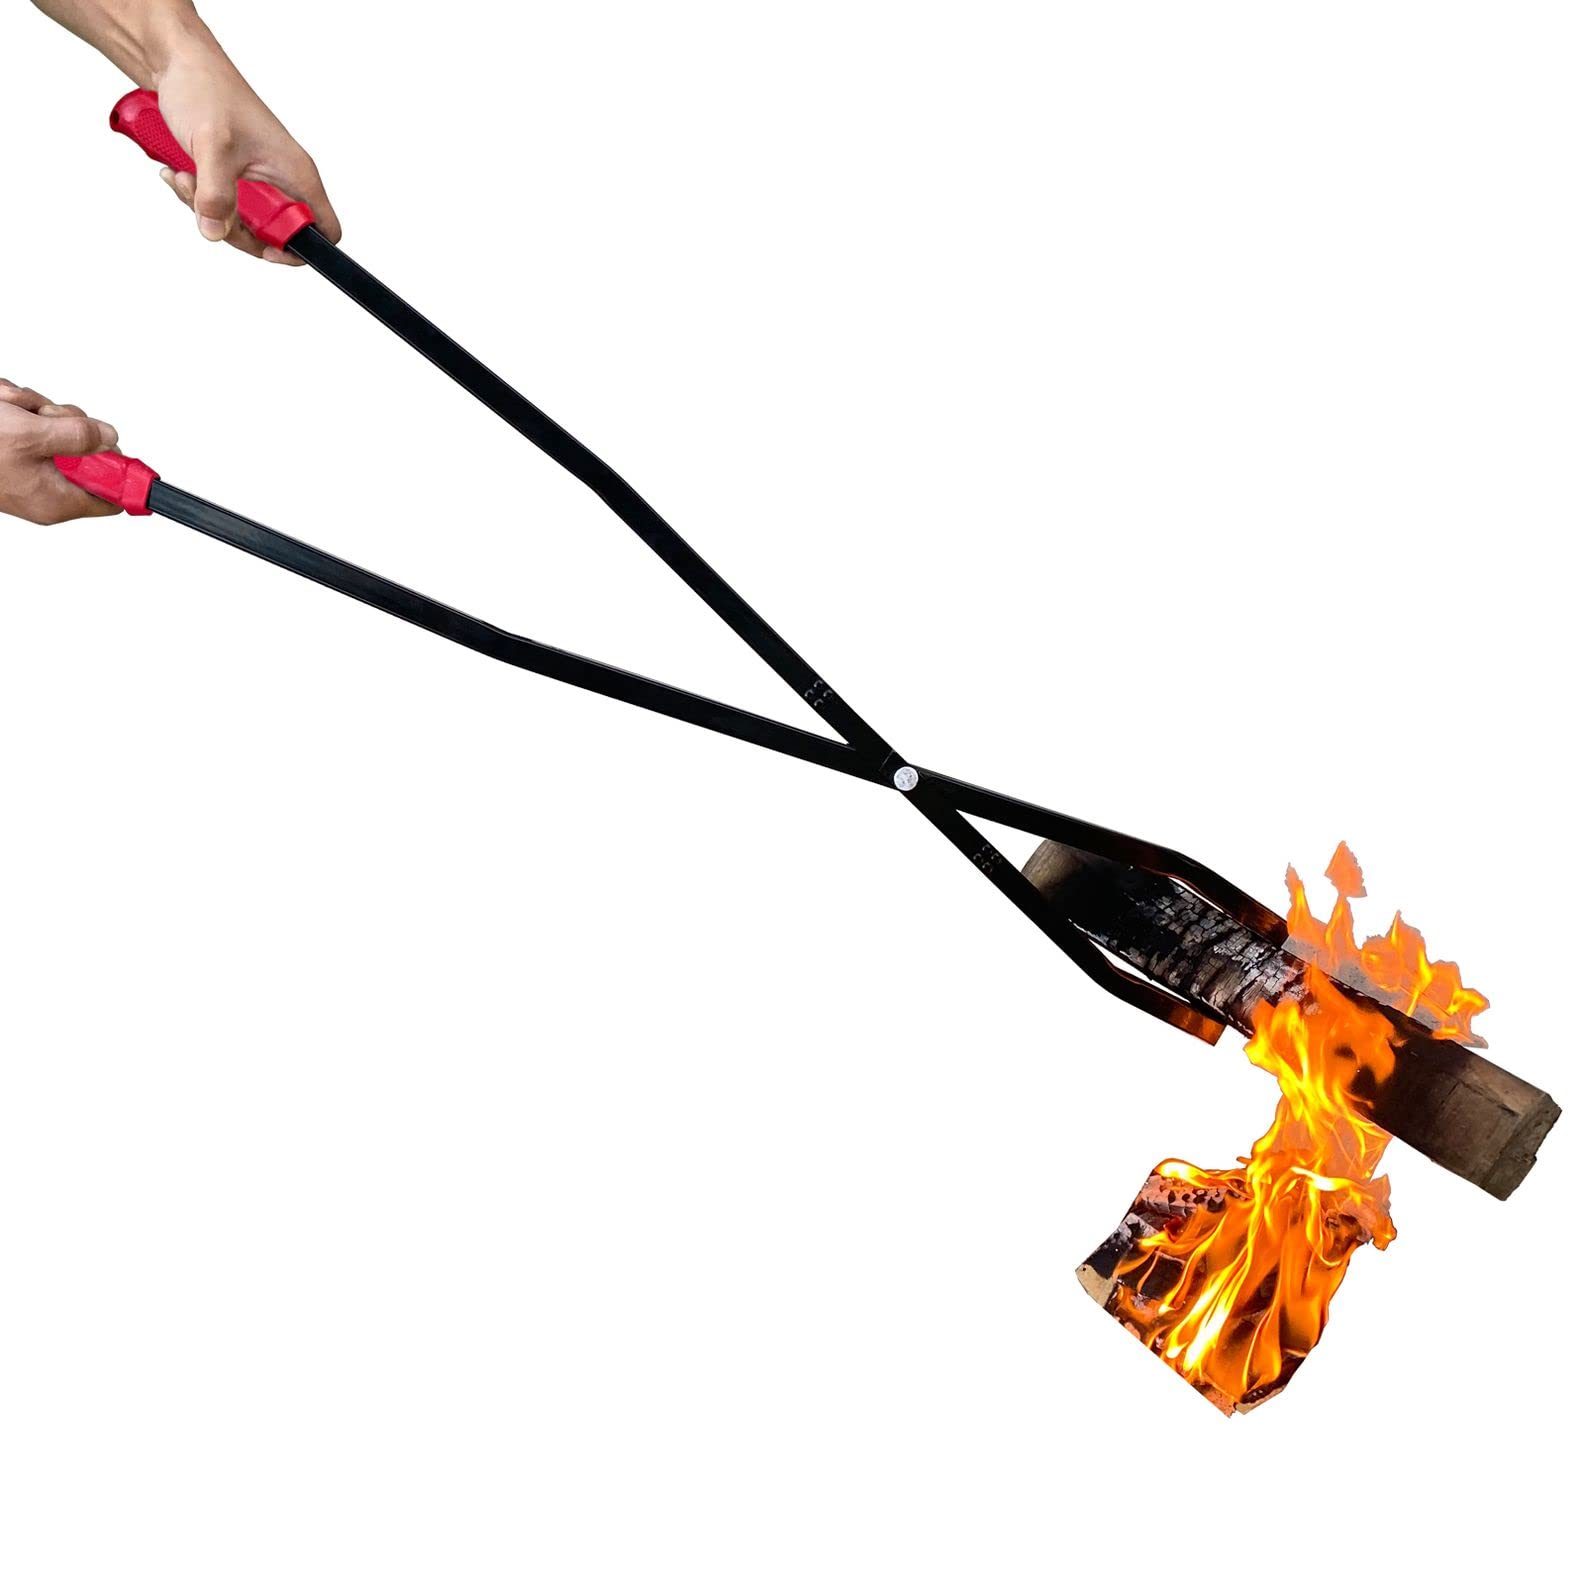 40" Fire Pit Tools Poker and Tongs for Safely Move Firewood, Rustproof with Rubber Handle for Fire Pit and Fireplace Accessories, Indoor and Outdoor Use